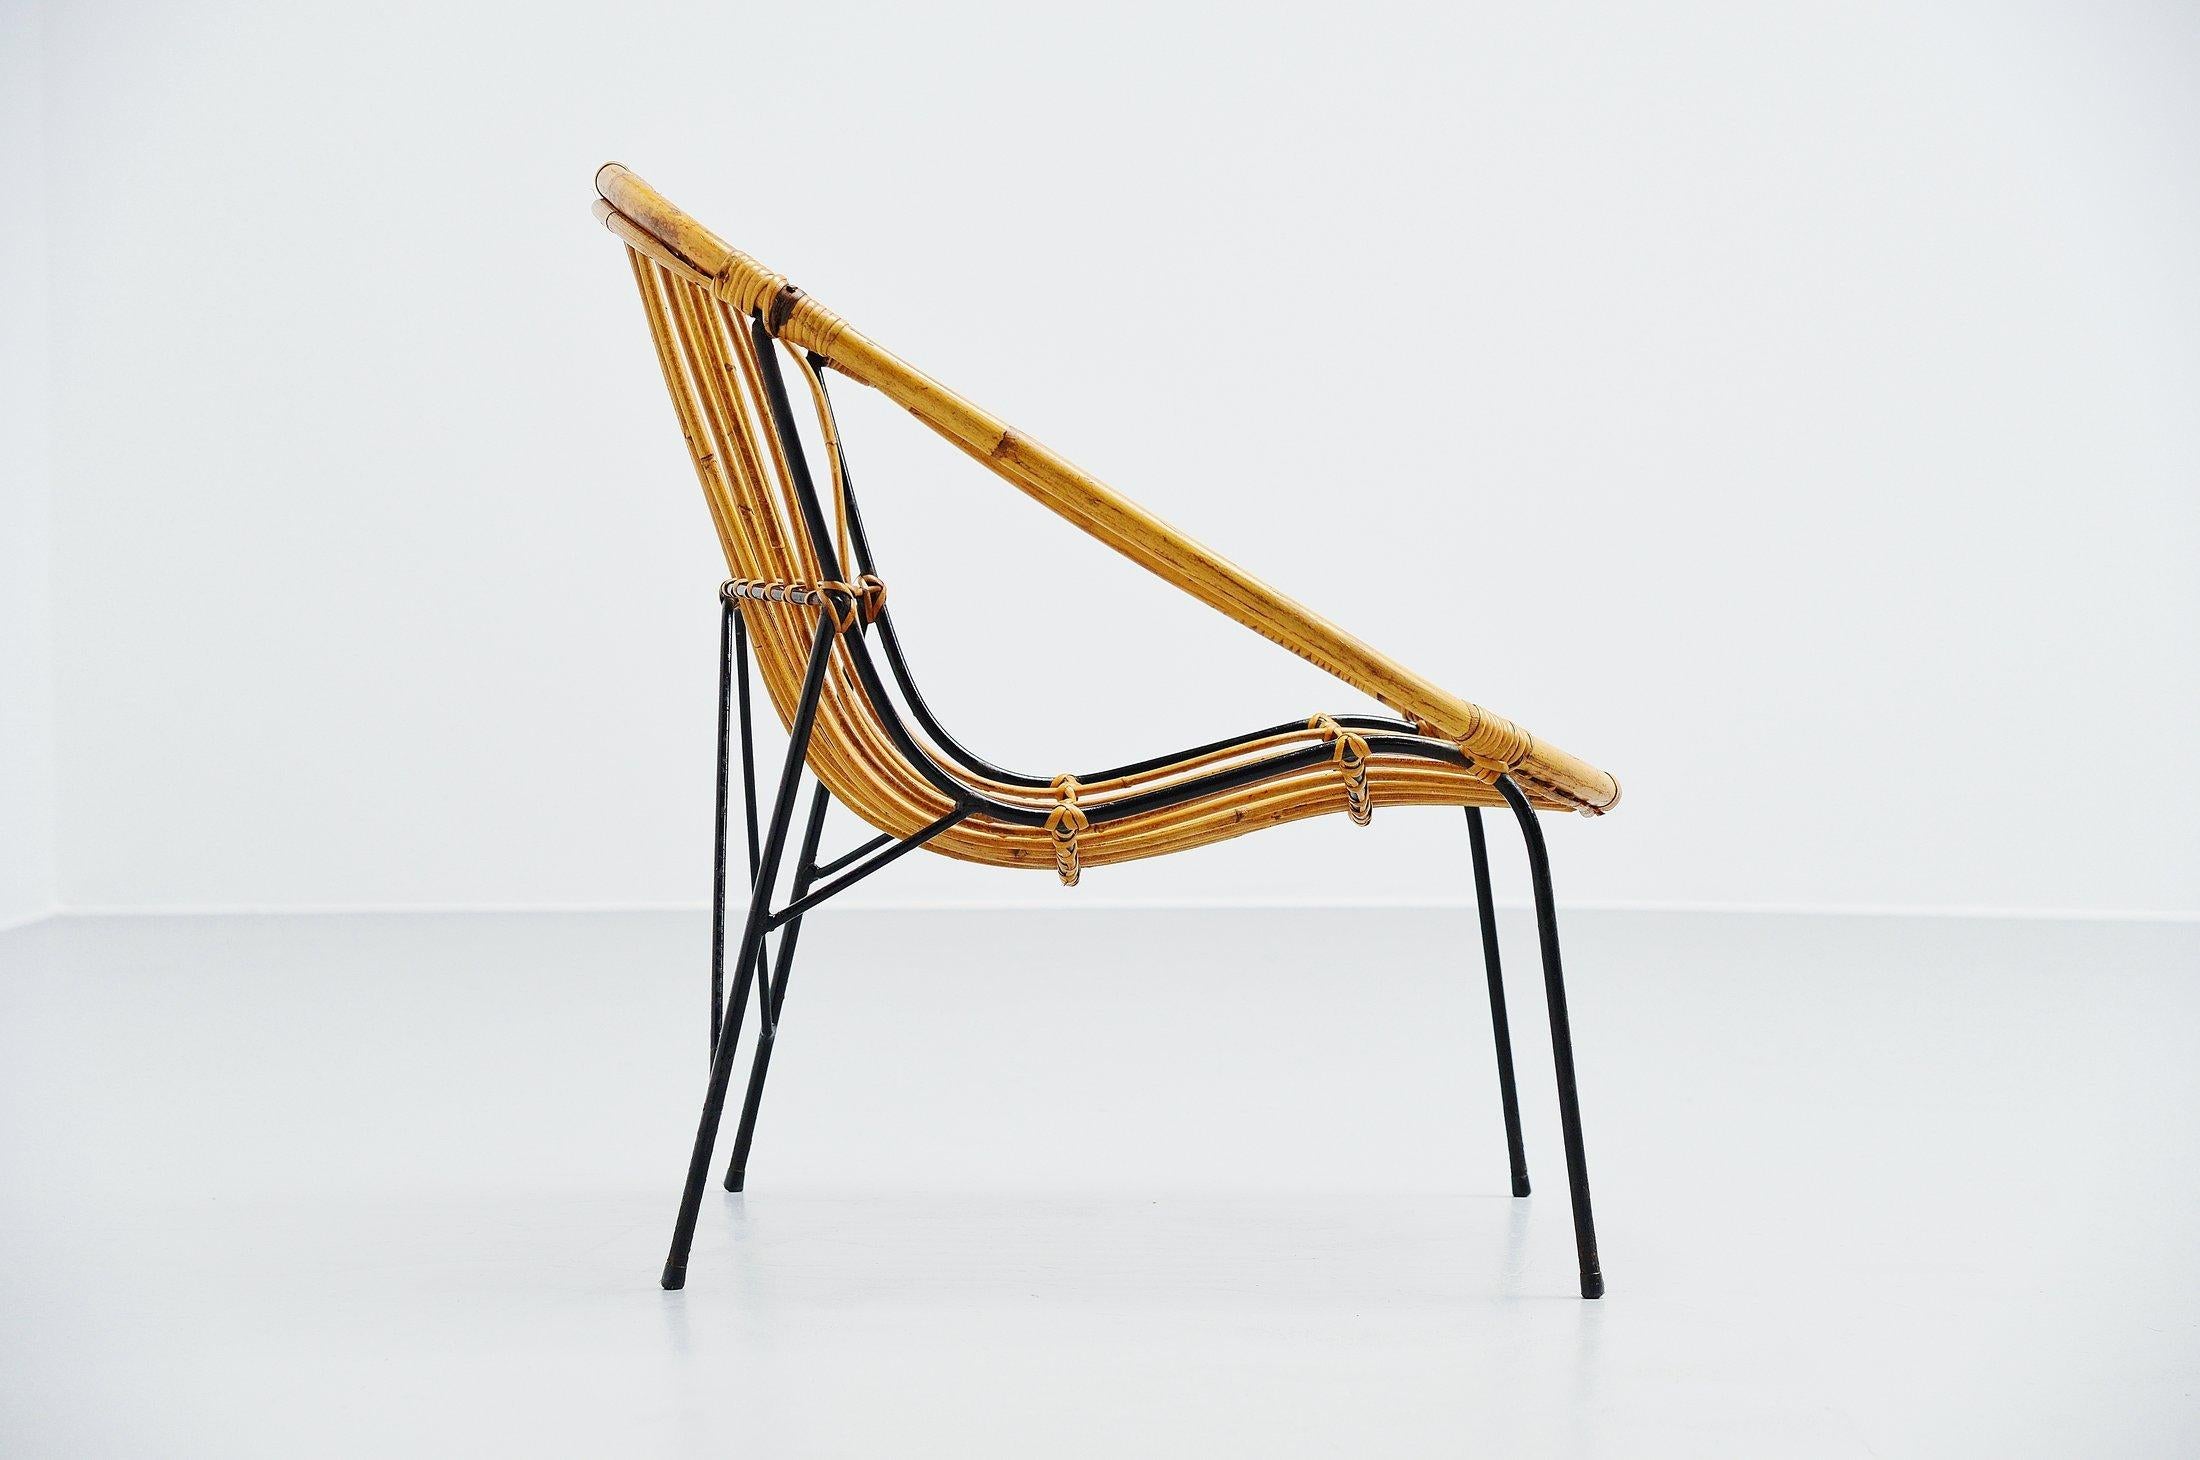 Cold-Painted French Sculptural Rattan Lounge Chair, France, 1950